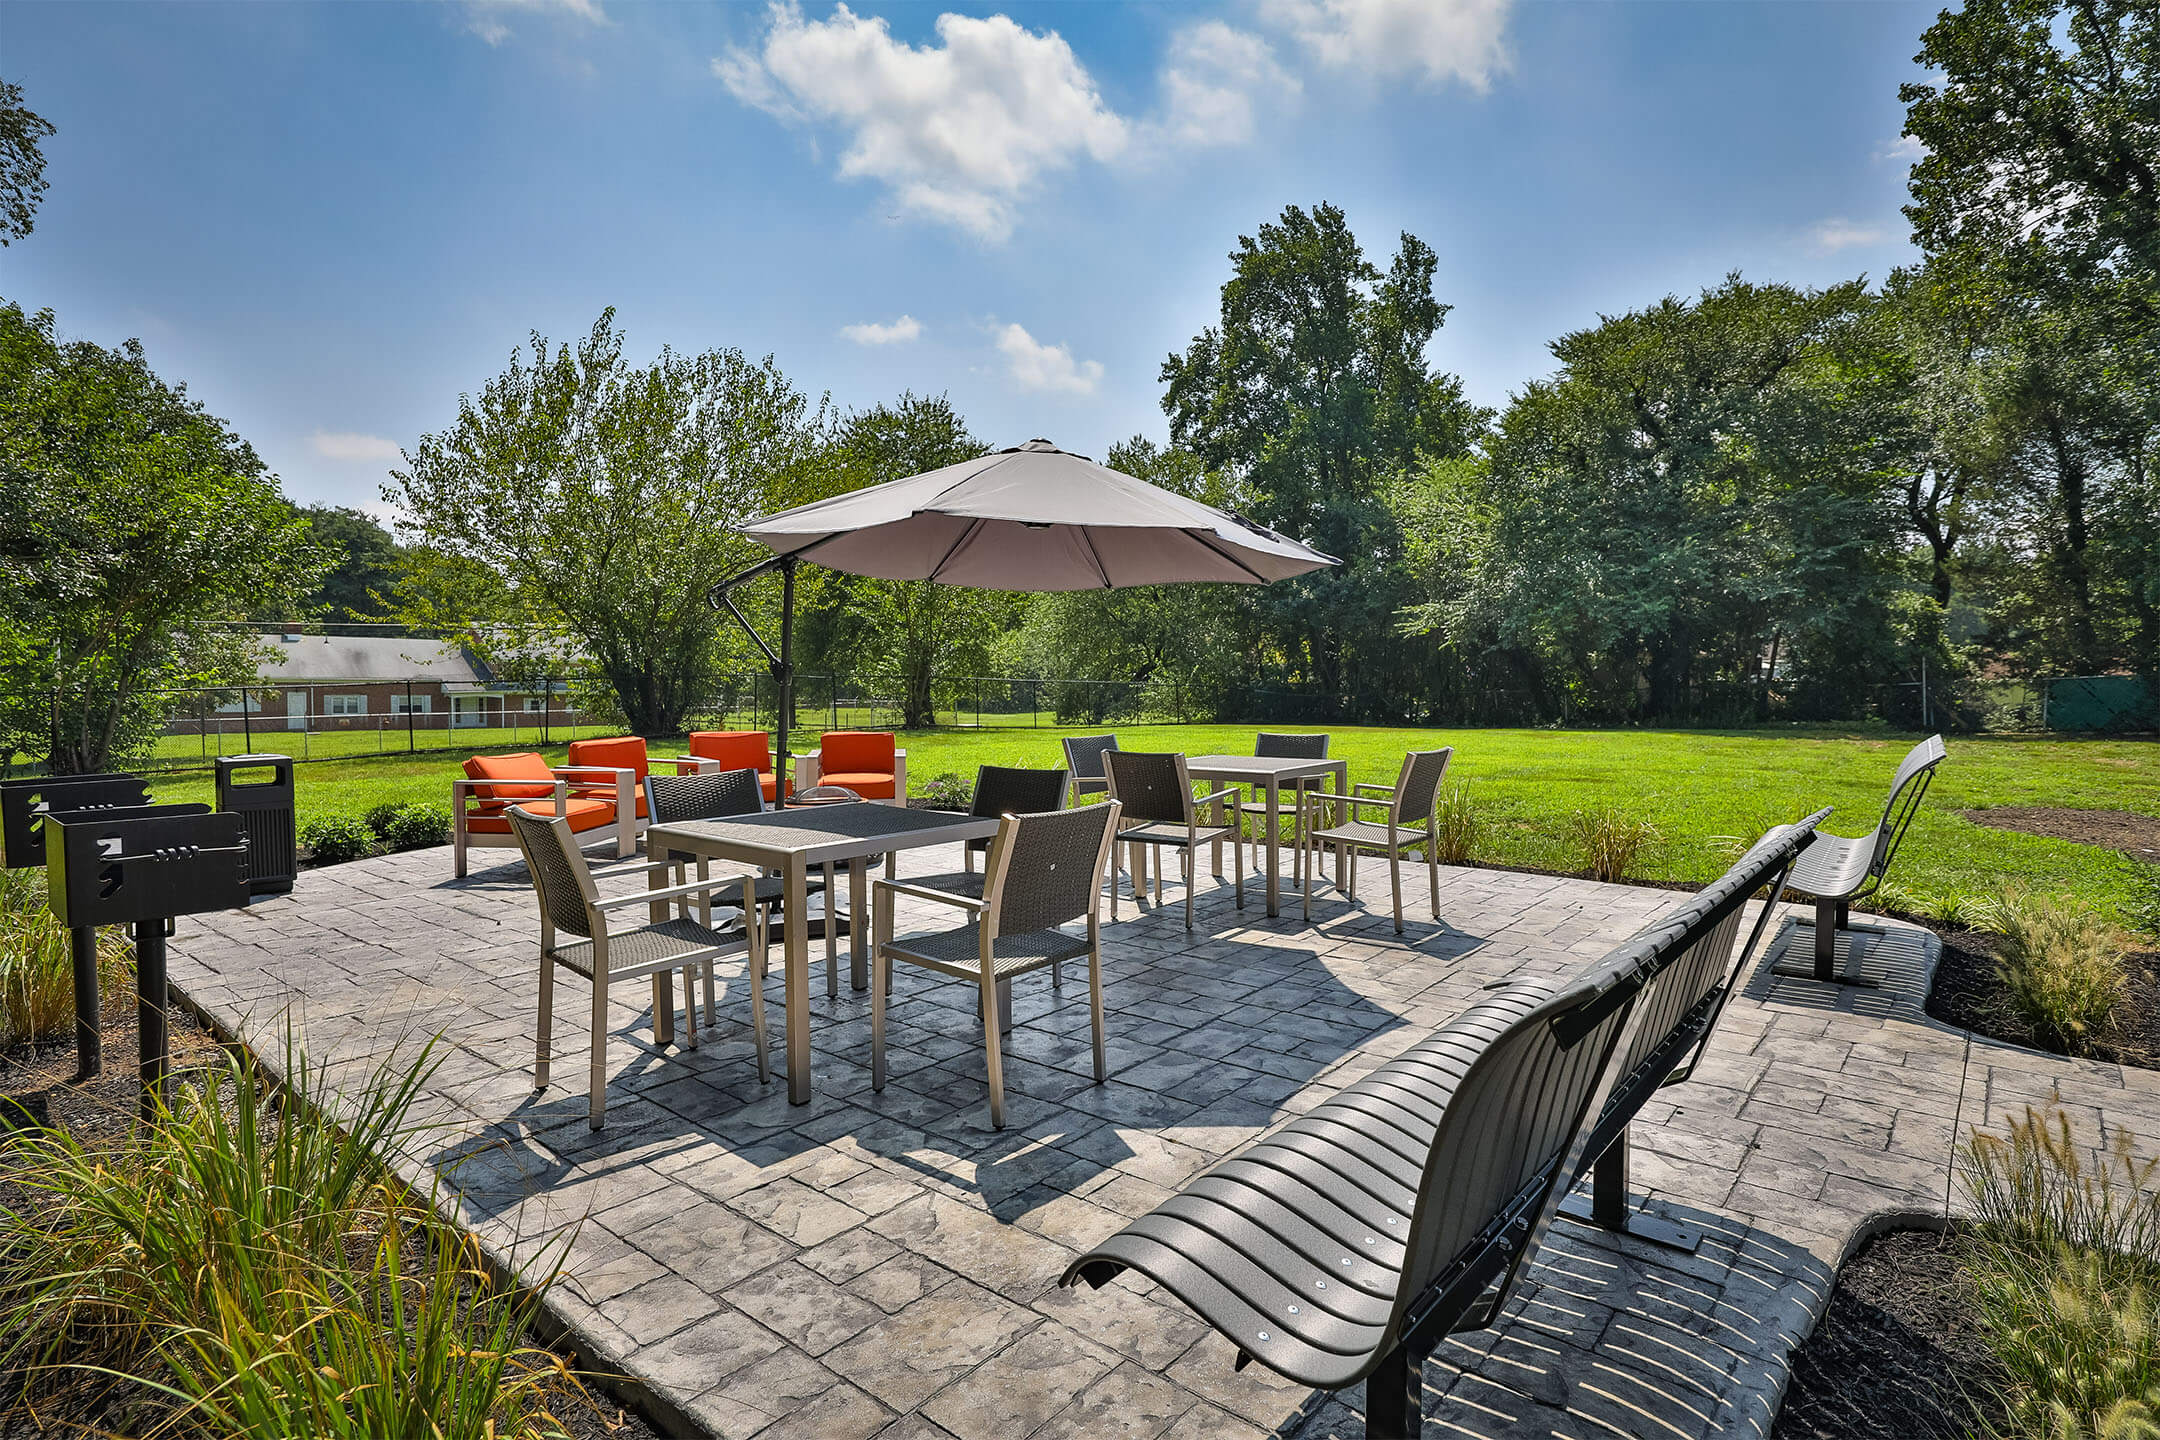 Outdoor patio and grill at Parc at Cherry Hill, Cherry Hill, New Jersey